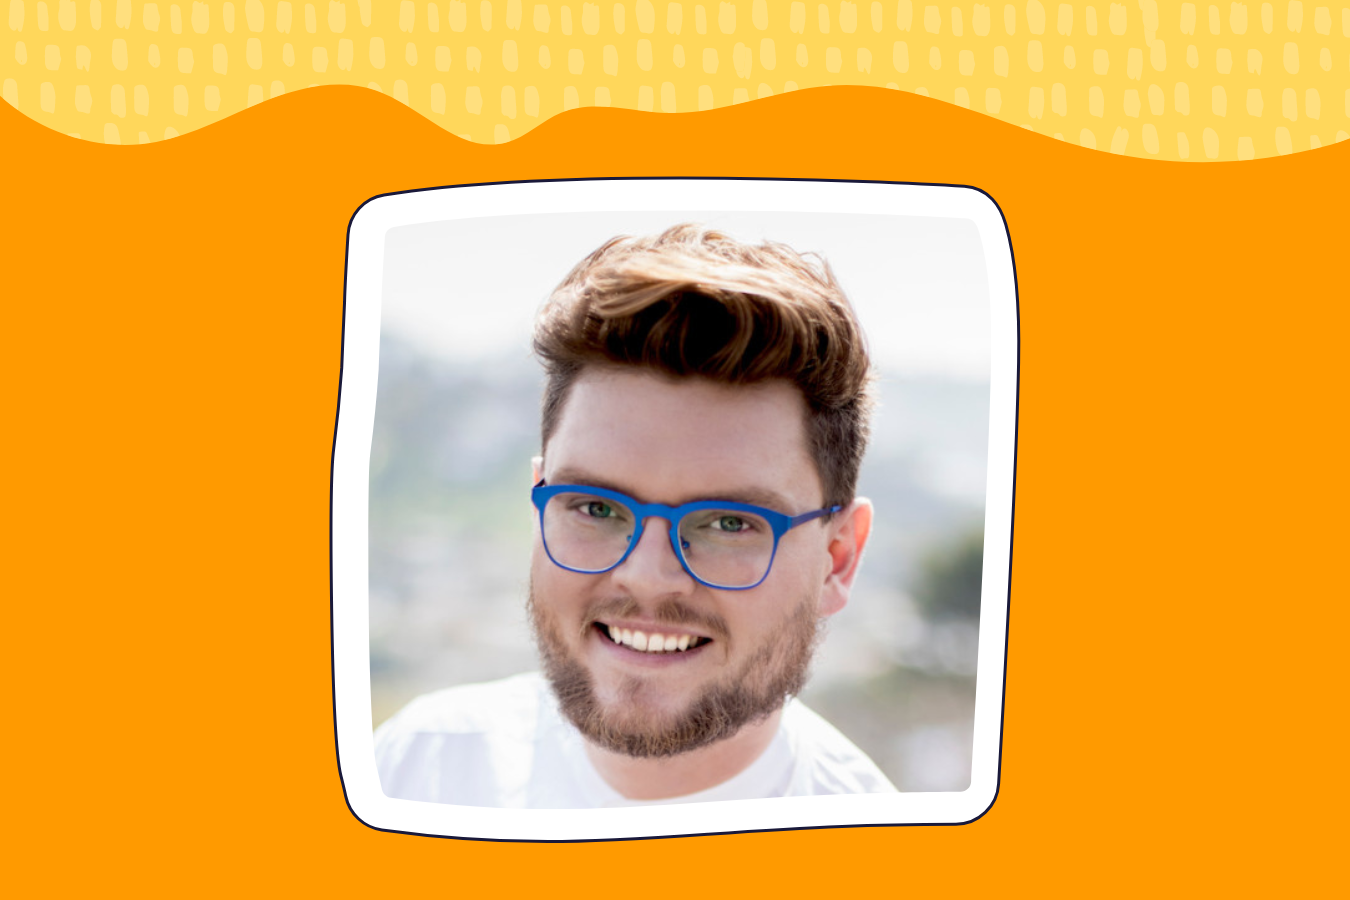 Thom headshot in graphic with yellow and orange background.